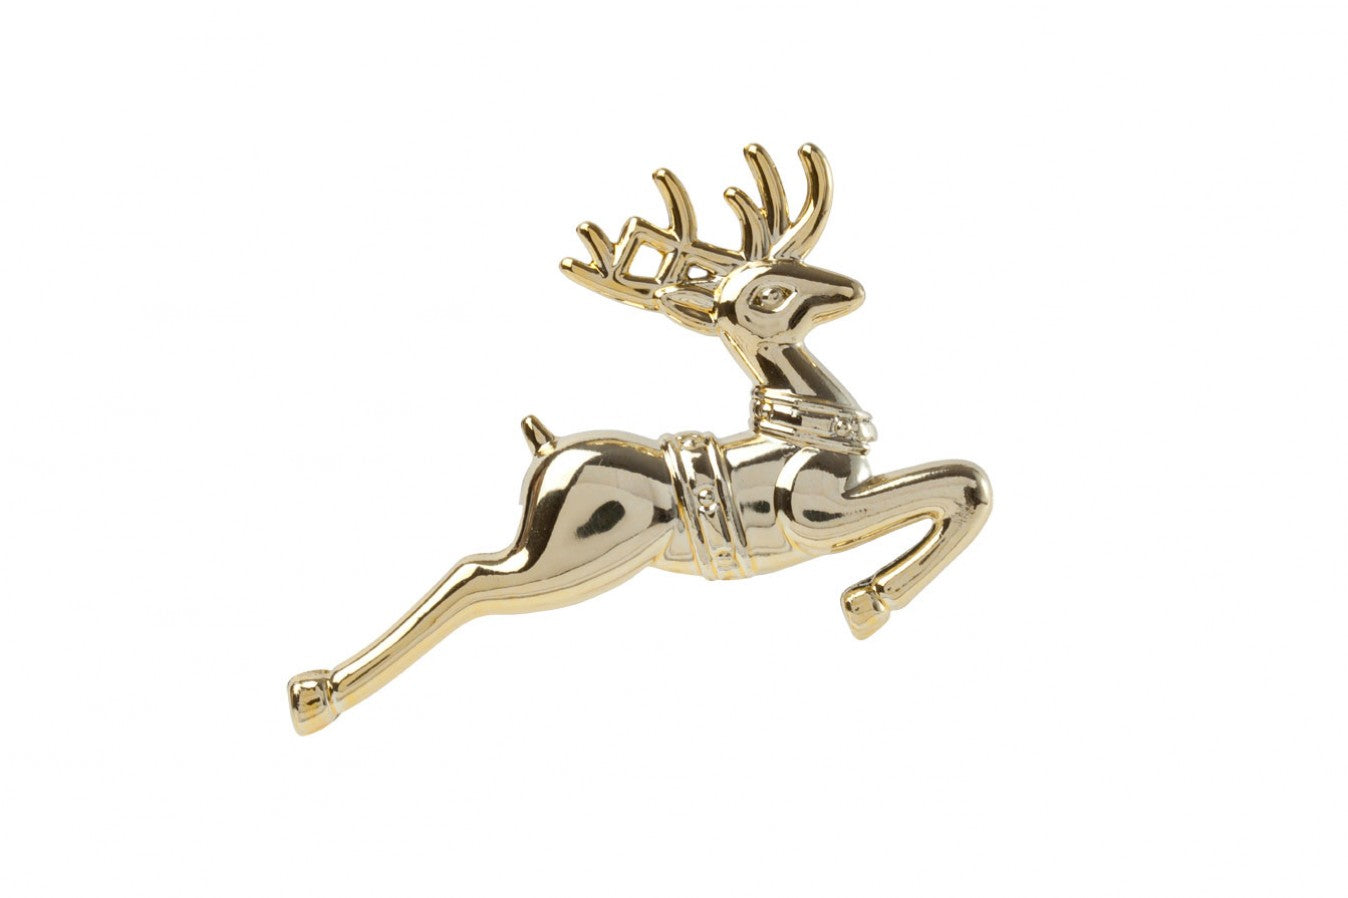 Gold Leaping Reindeer Plastic Christmas Cake or Yule Log Decoration - The Cooks Cupboard Ltd